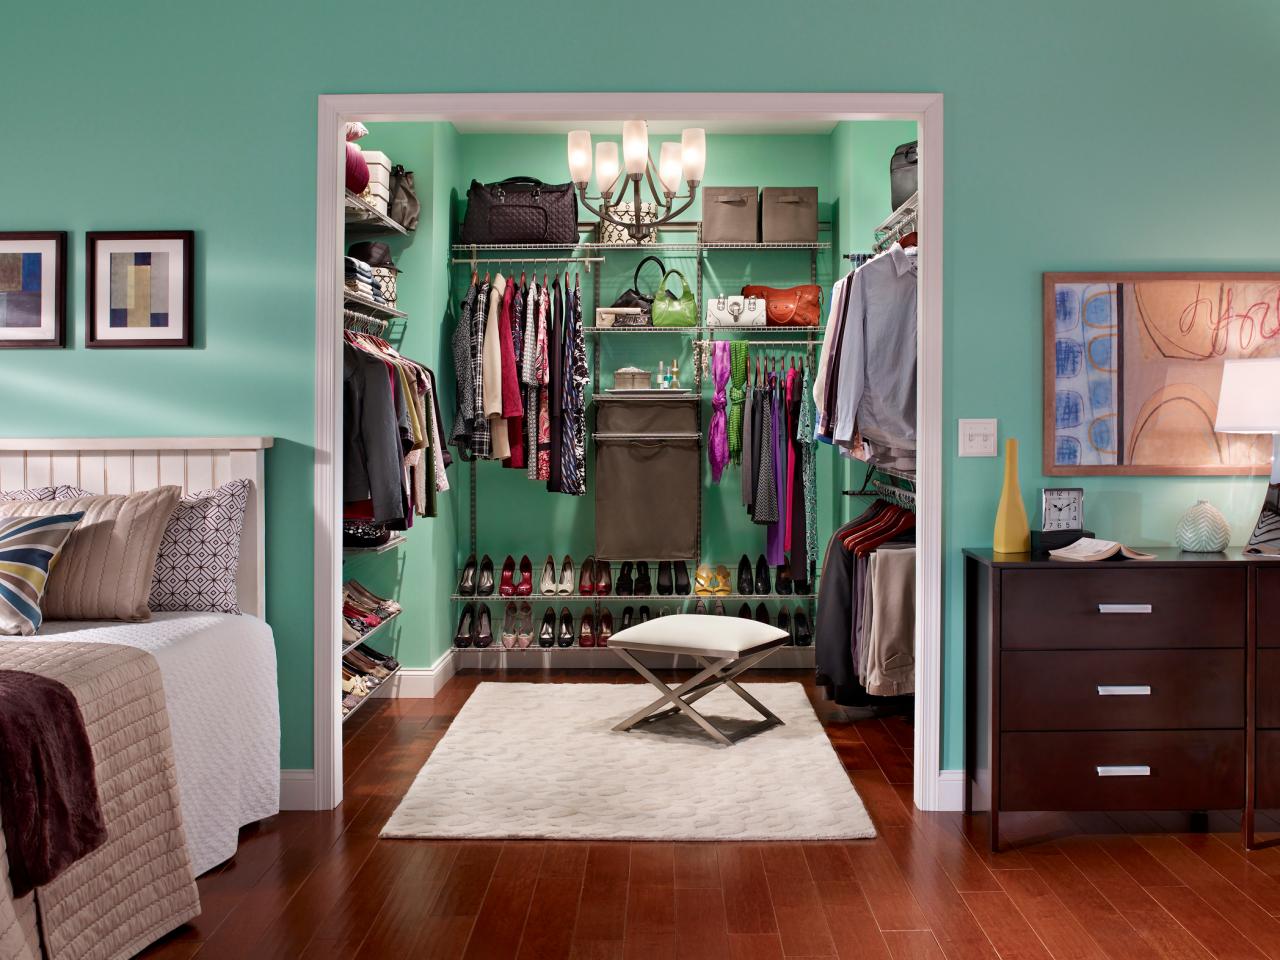 Closet Costs And Budget What You Need To Know Hgtv,Small Pool House Plans With Bedroom